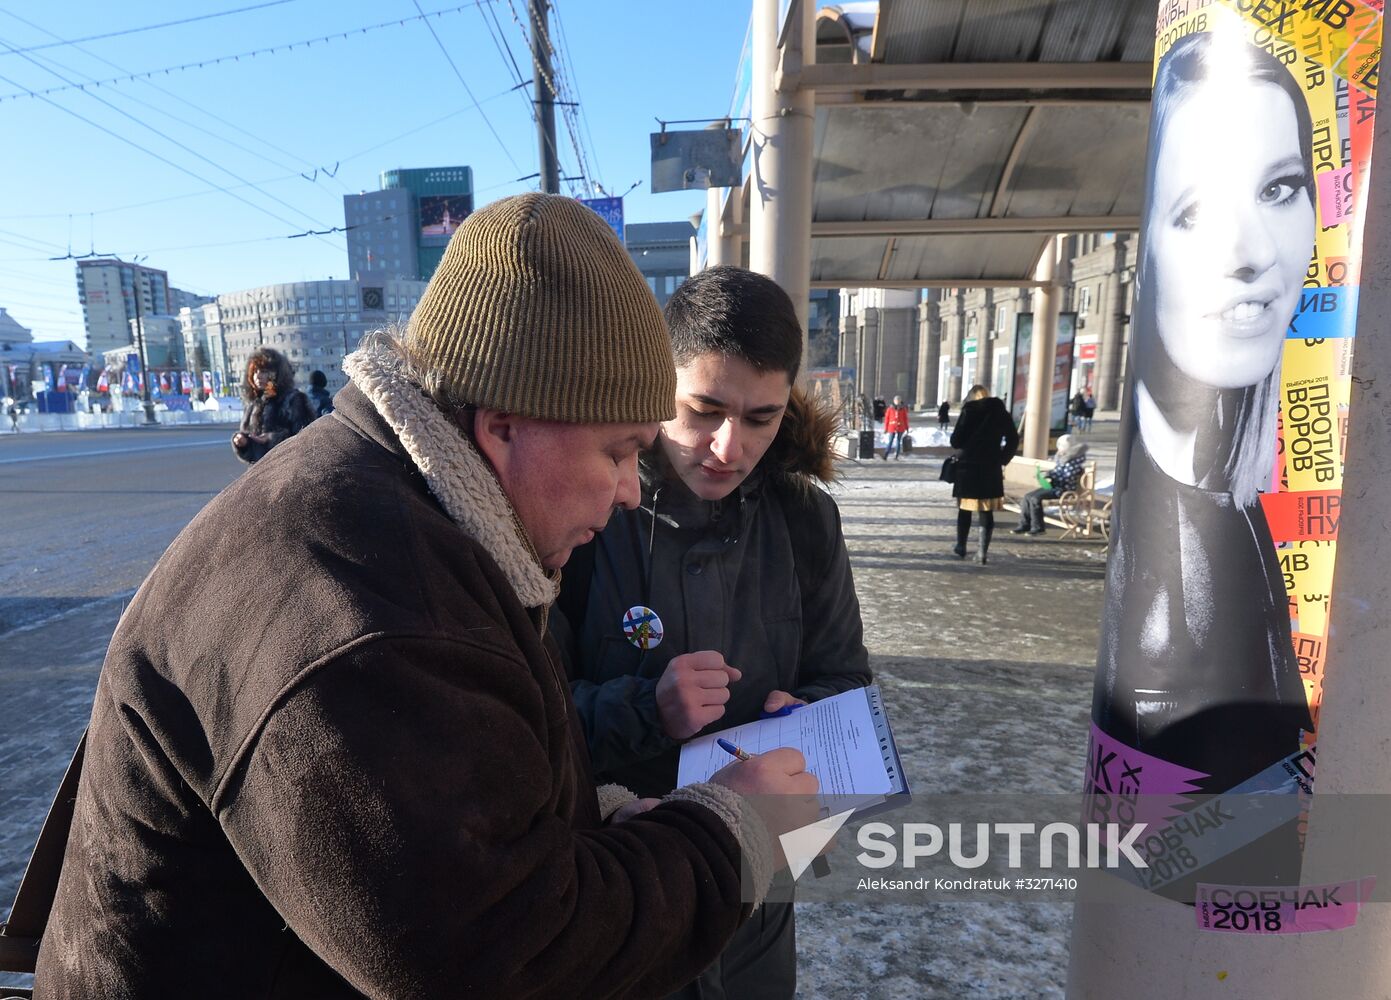 Collecting signatures in support of Ksenia Sobchak